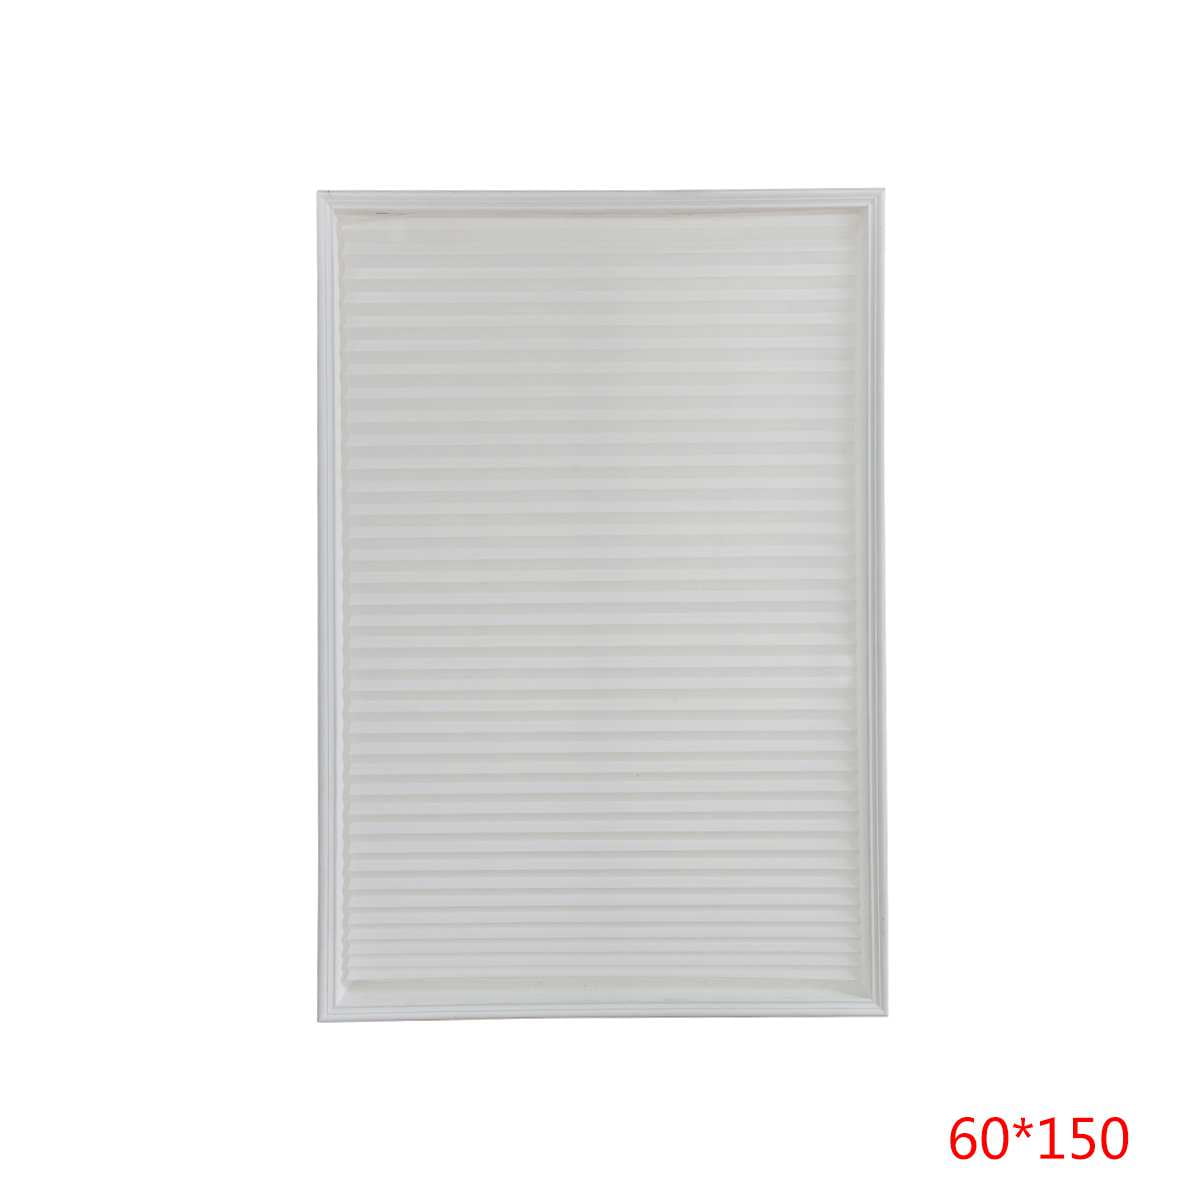 Gray Self-Adhesive Blinds Blackout Window Curtains for Bathroom Shades 